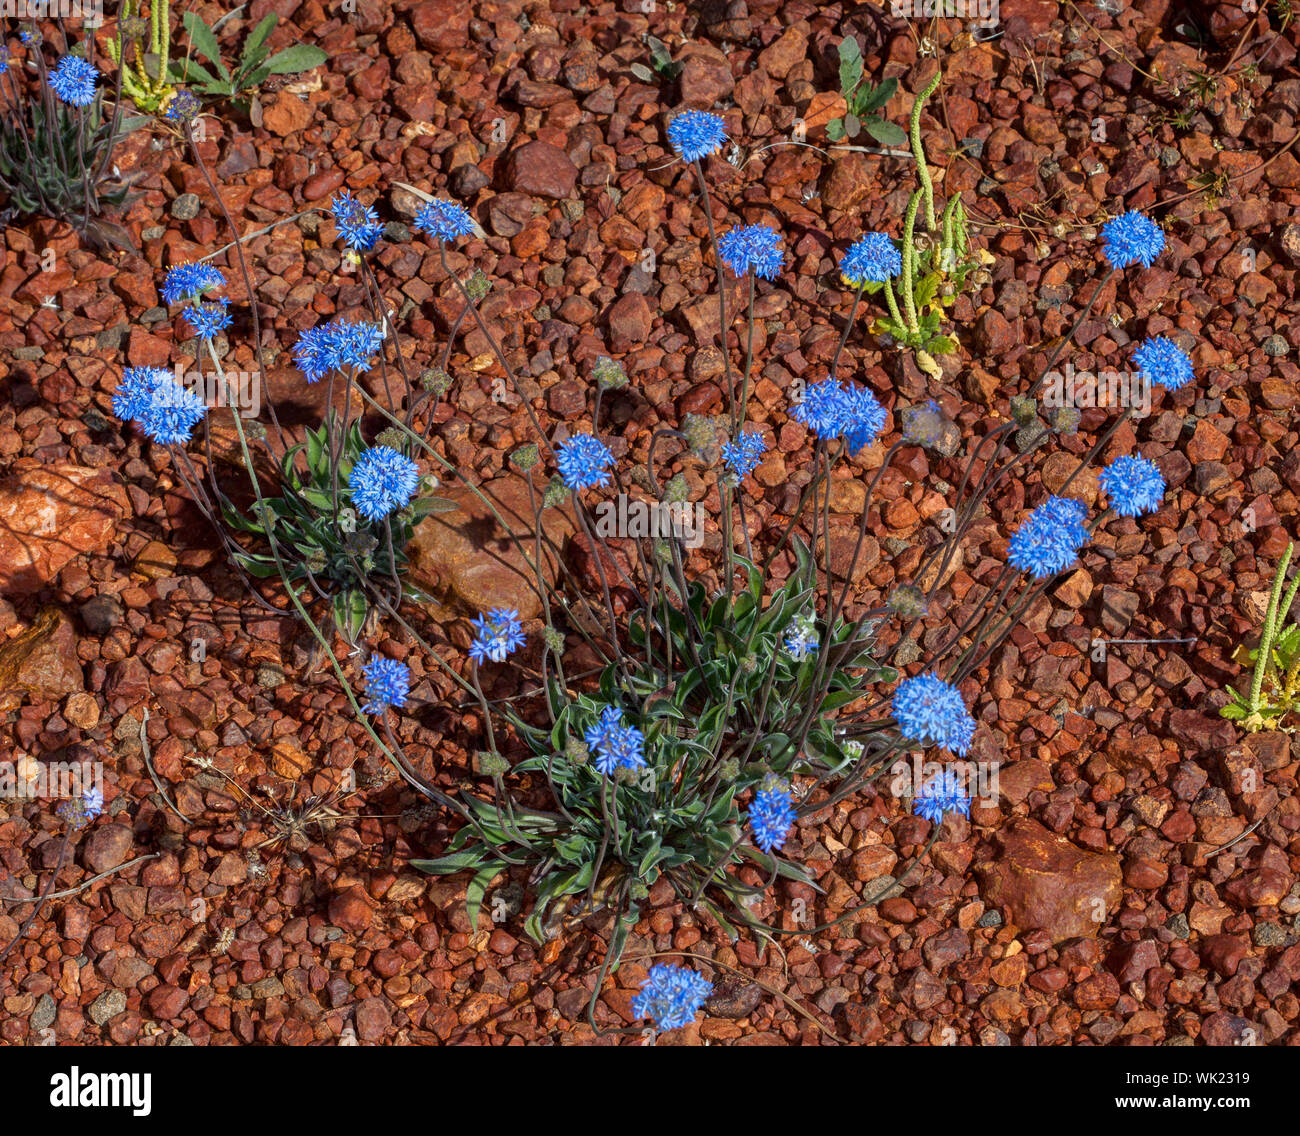 Vivid blue flowers and dark green foliage of Brunonia australis, blue pincushion flower, wildflowers against red stony ground of outback Australia Stock Photo